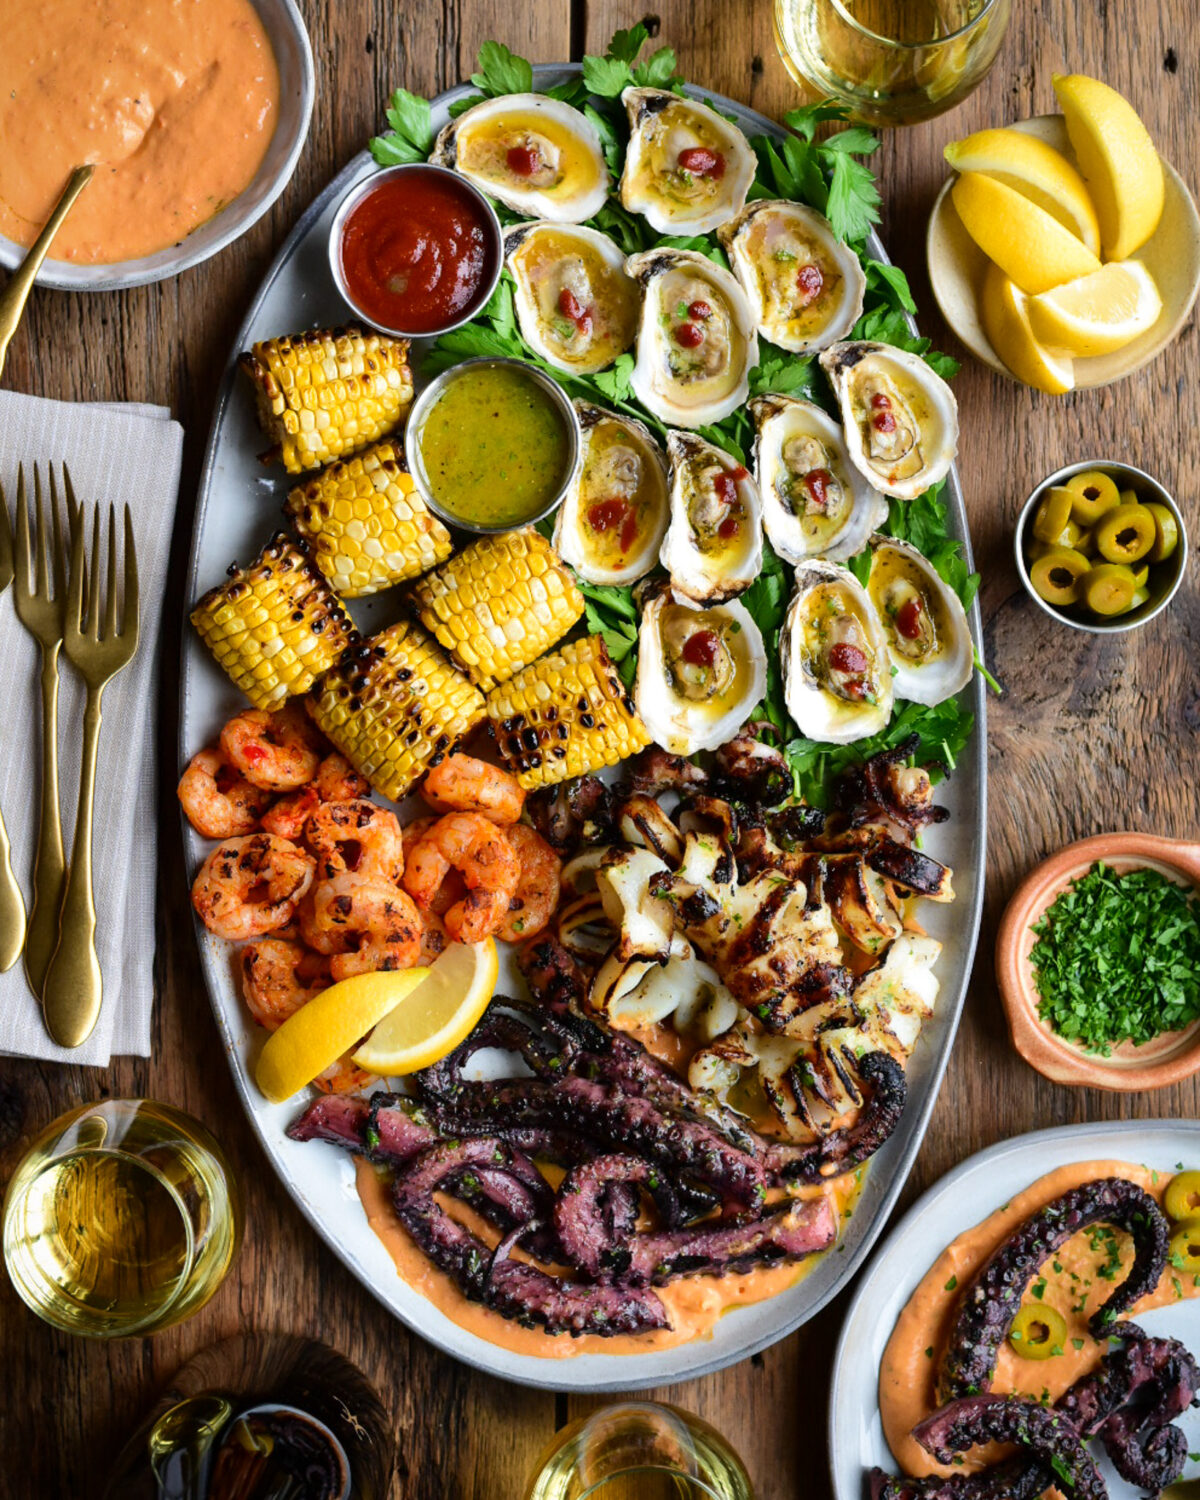 Beautifully charred, tender sous-vide octopus and calamari. Plump, juicy, spicy shrimp and baked oysters. Served with corn, lemon-herb dressing and spicy red pepper hummus.